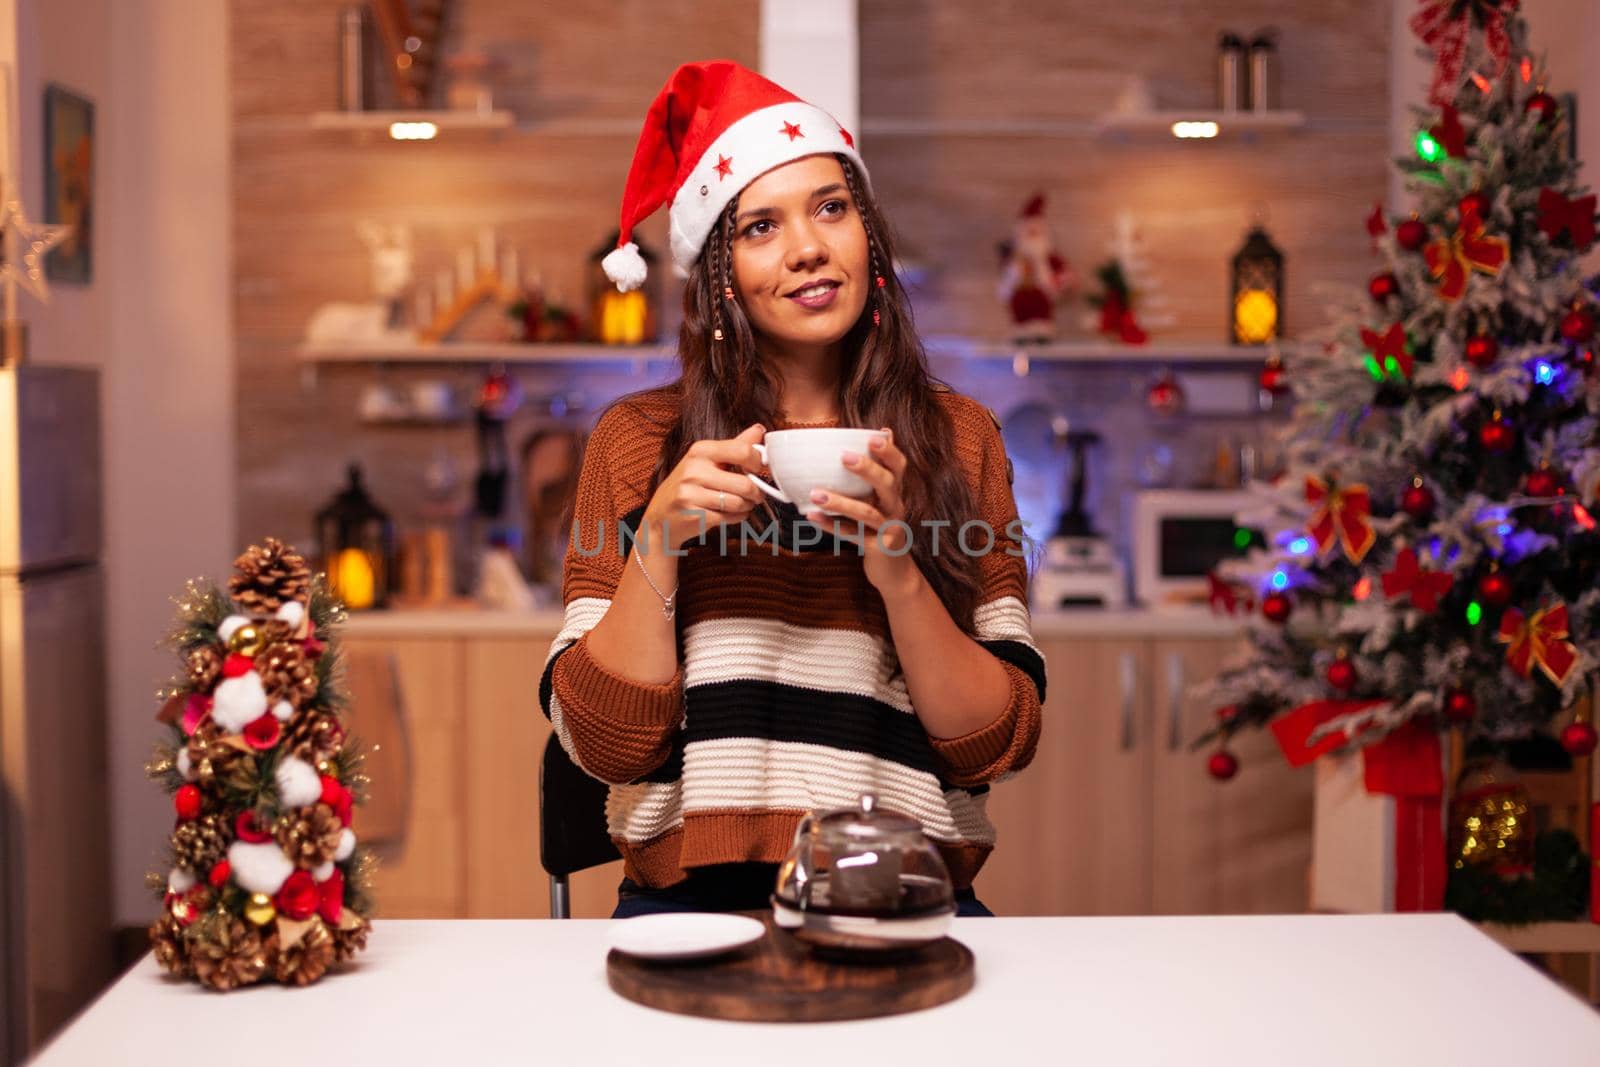 Portrait of young woman wearing santa hat and smiling by DCStudio